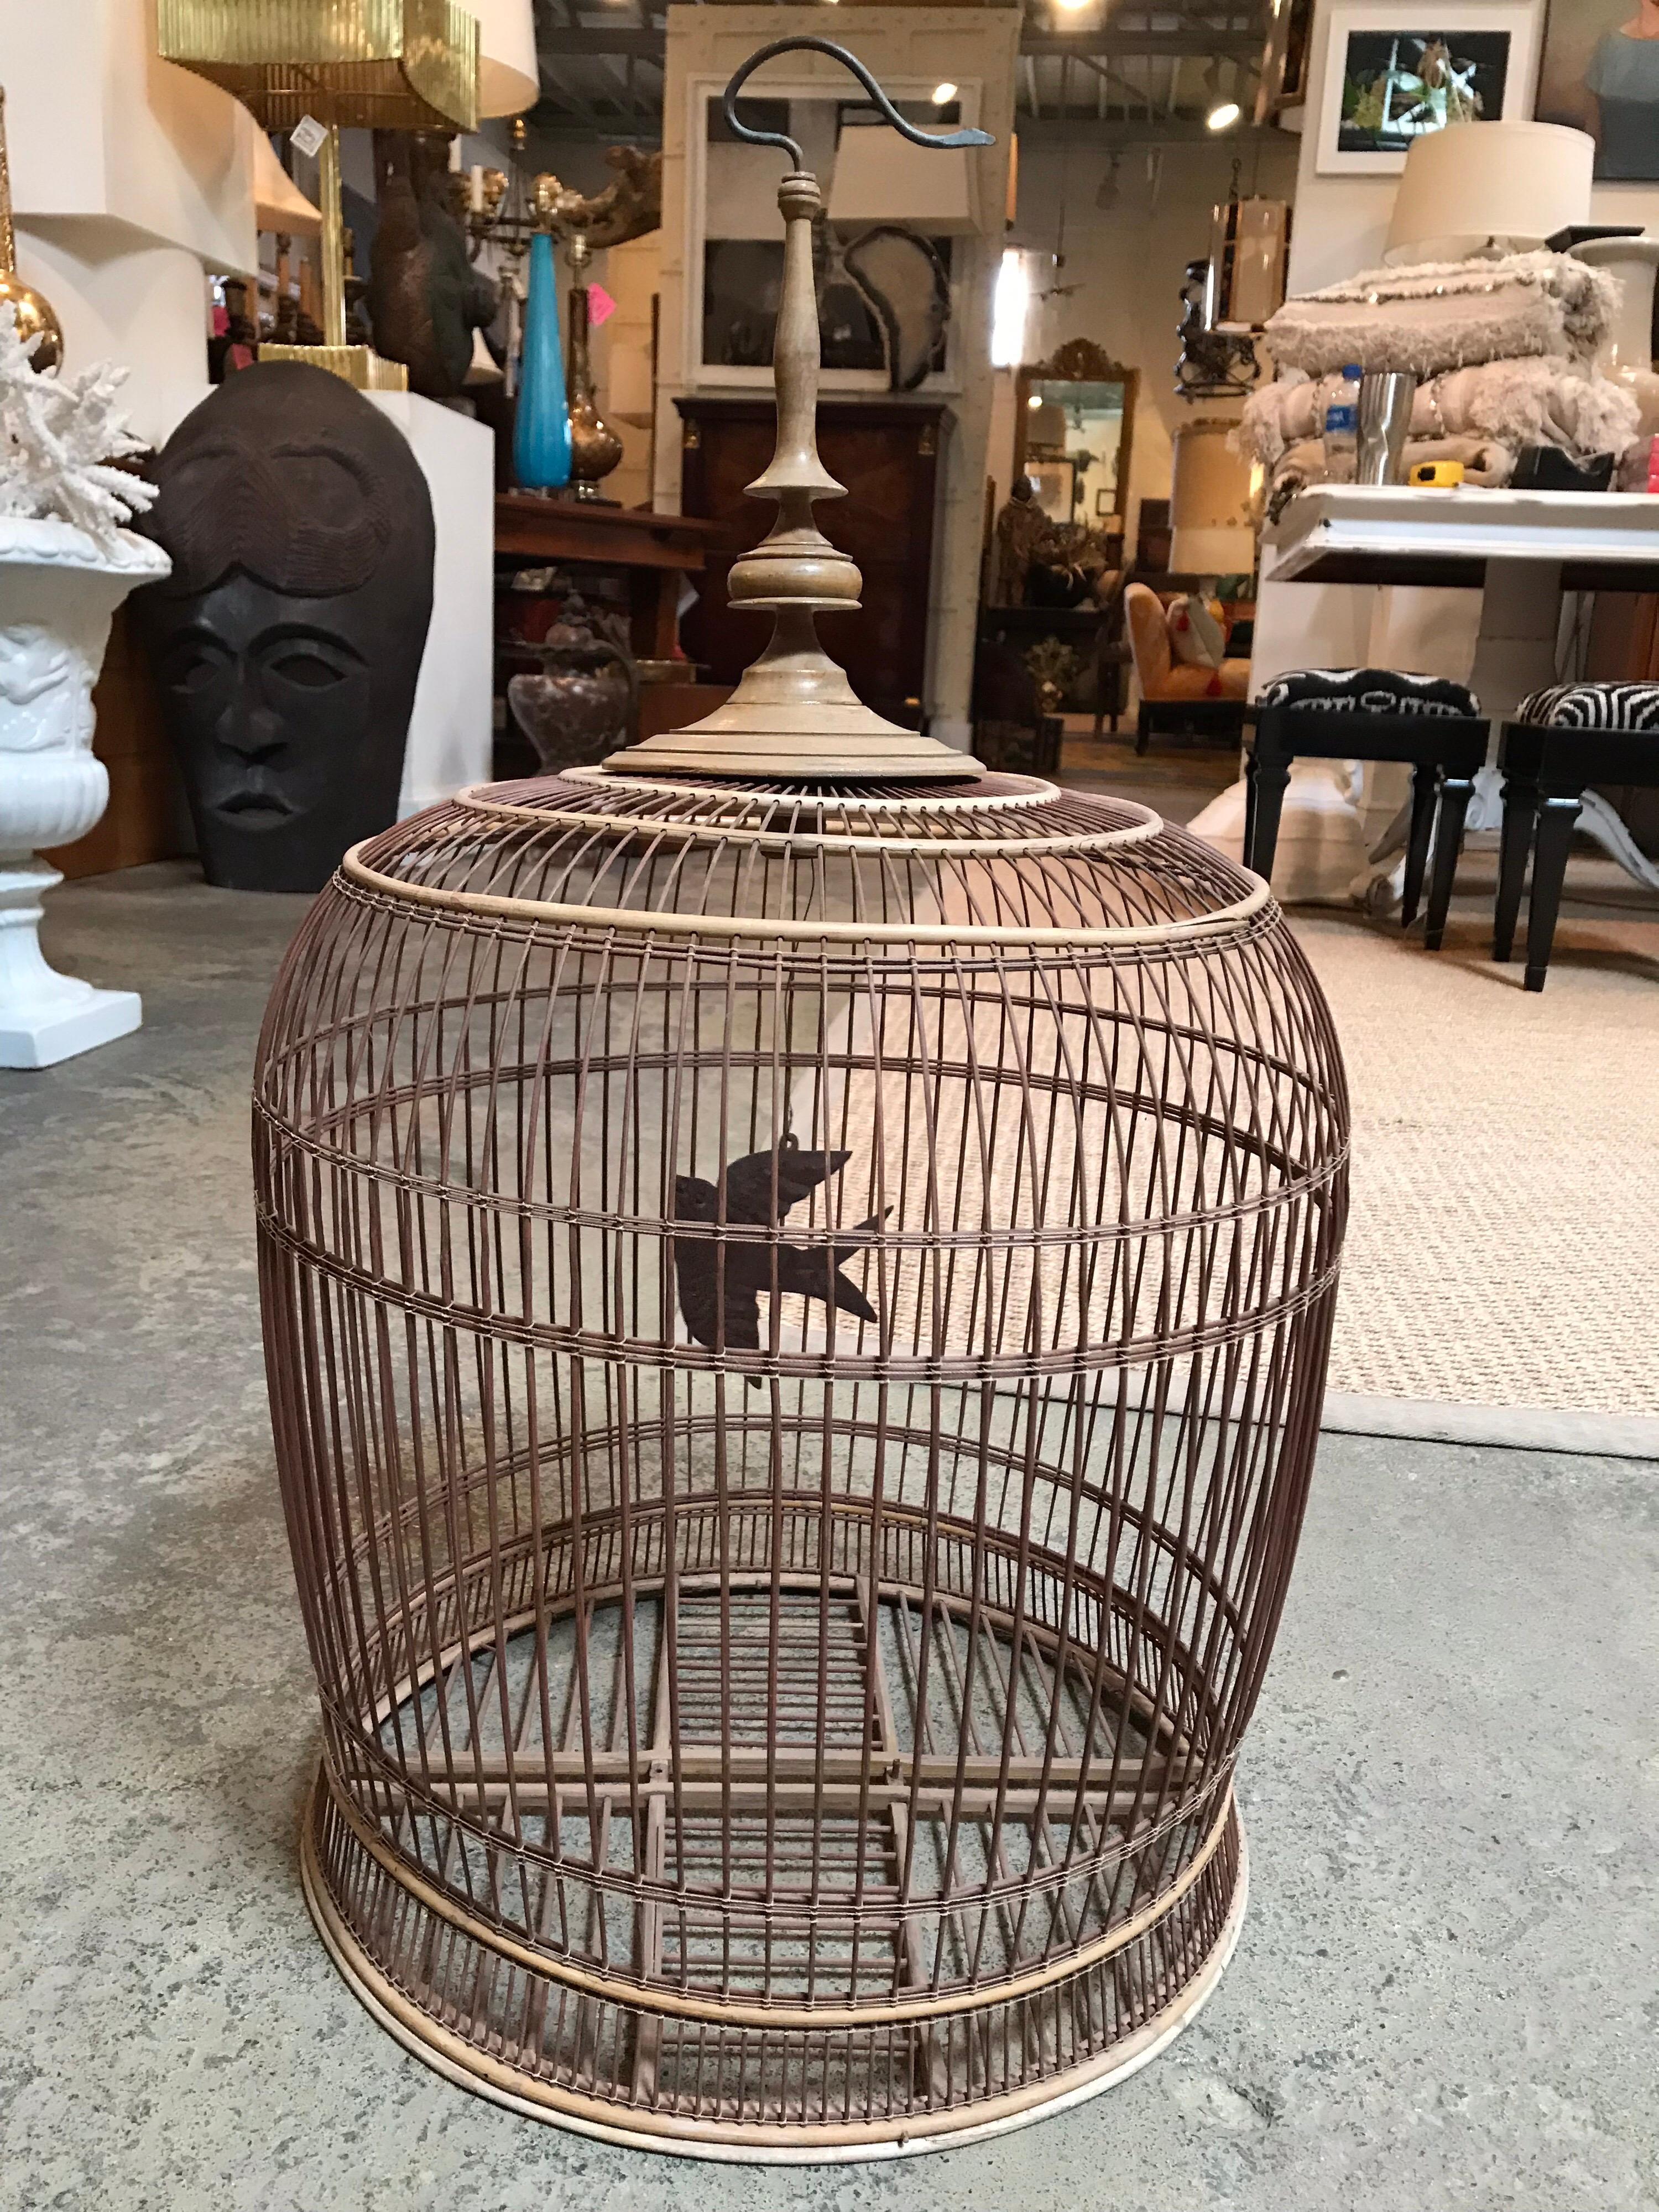 This Chinese birdcage is handmade from thin pieces of wood. It has a thin metal piece inside that's stamped and shaped to resemble a bird.